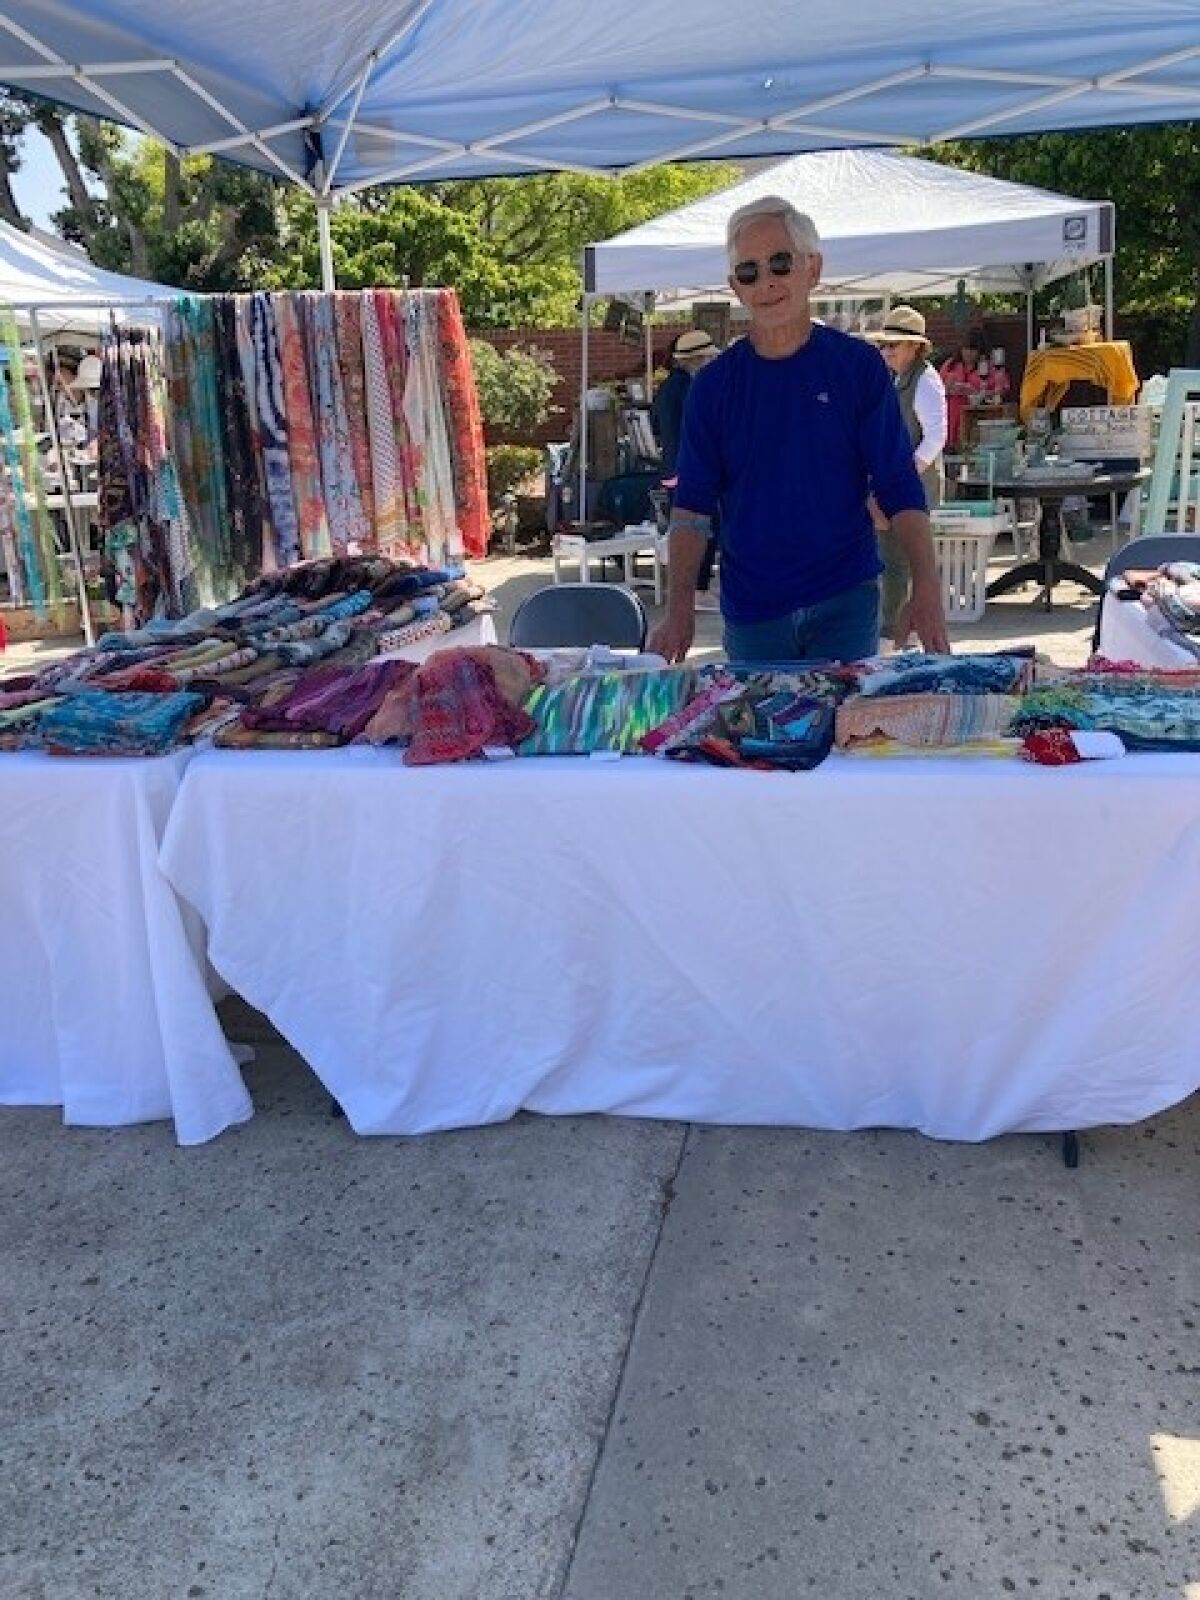 Bruce Belsky of Vicky La Jolla shows the types of items that he and his wife, Valerie, bring to the Christmas Marketplace.